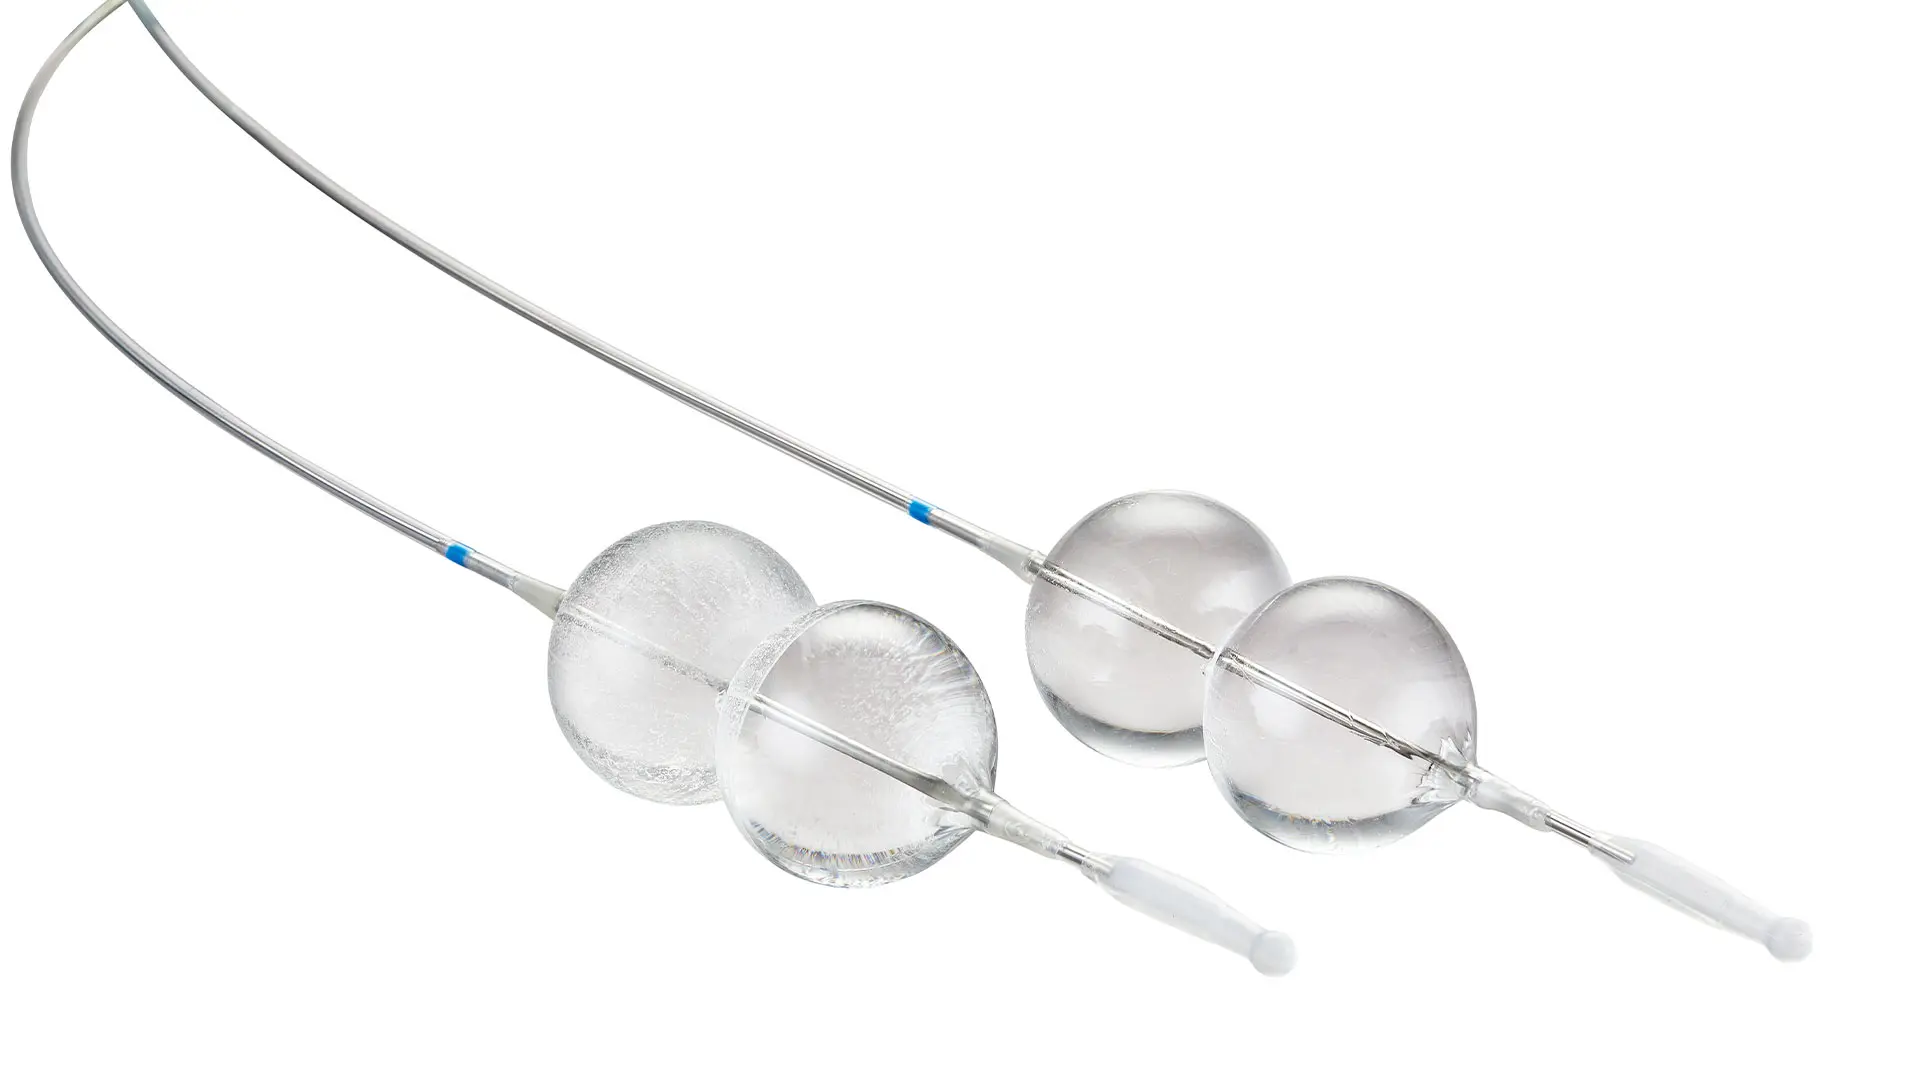 The Optilume BPH Catheter System is a unique minimally invasive surgical therapy that combines mechanical dilation using a propriety double-lobe balloon concurrently with localized delivery of paclitaxel for the treatment of LUTS secondary to BPH. Photo: Laborie Medical Technologies